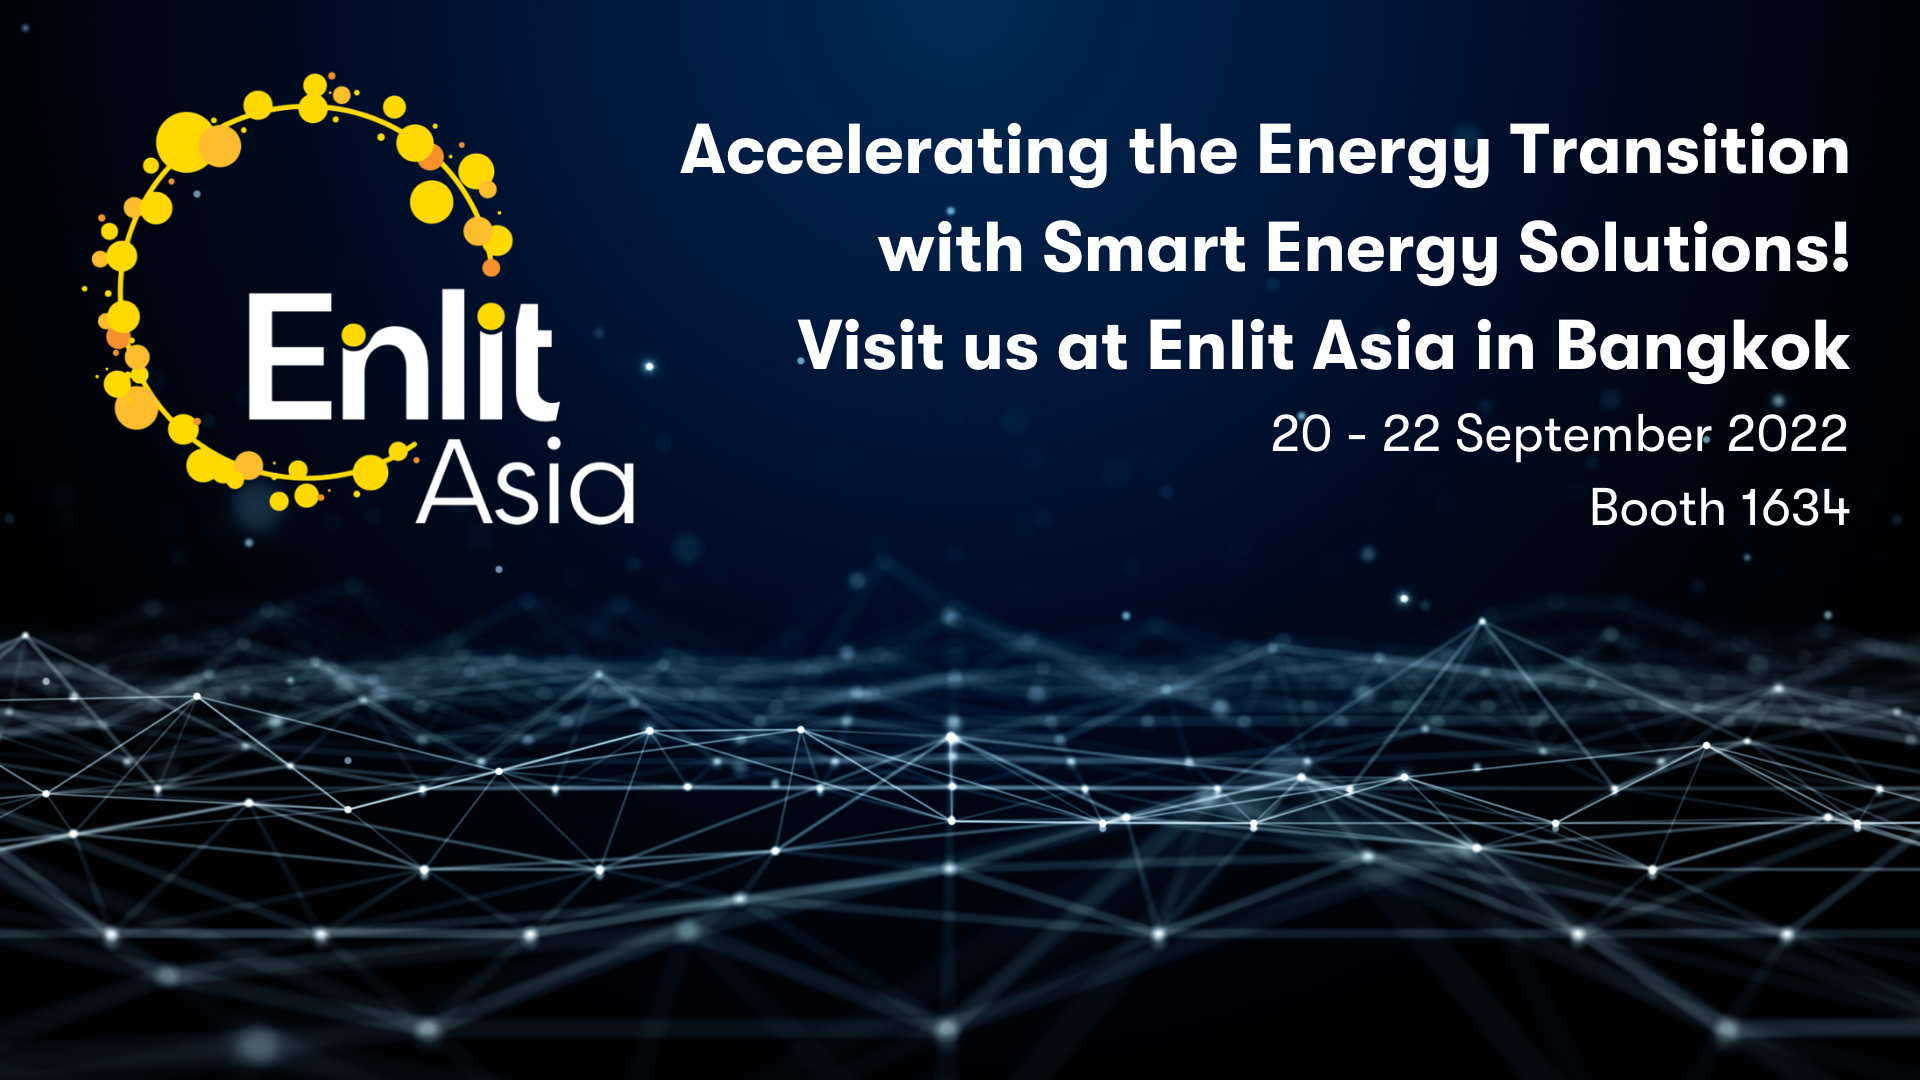 uploads/pics/https://systemtechnologies.iqony.energy/uploads/pics/Accelerating_the_Energy_Transition_with_Smart_Digital_Solutions_Visit_us_at_Enlit_Asia_in_Bangkok__1__22.png